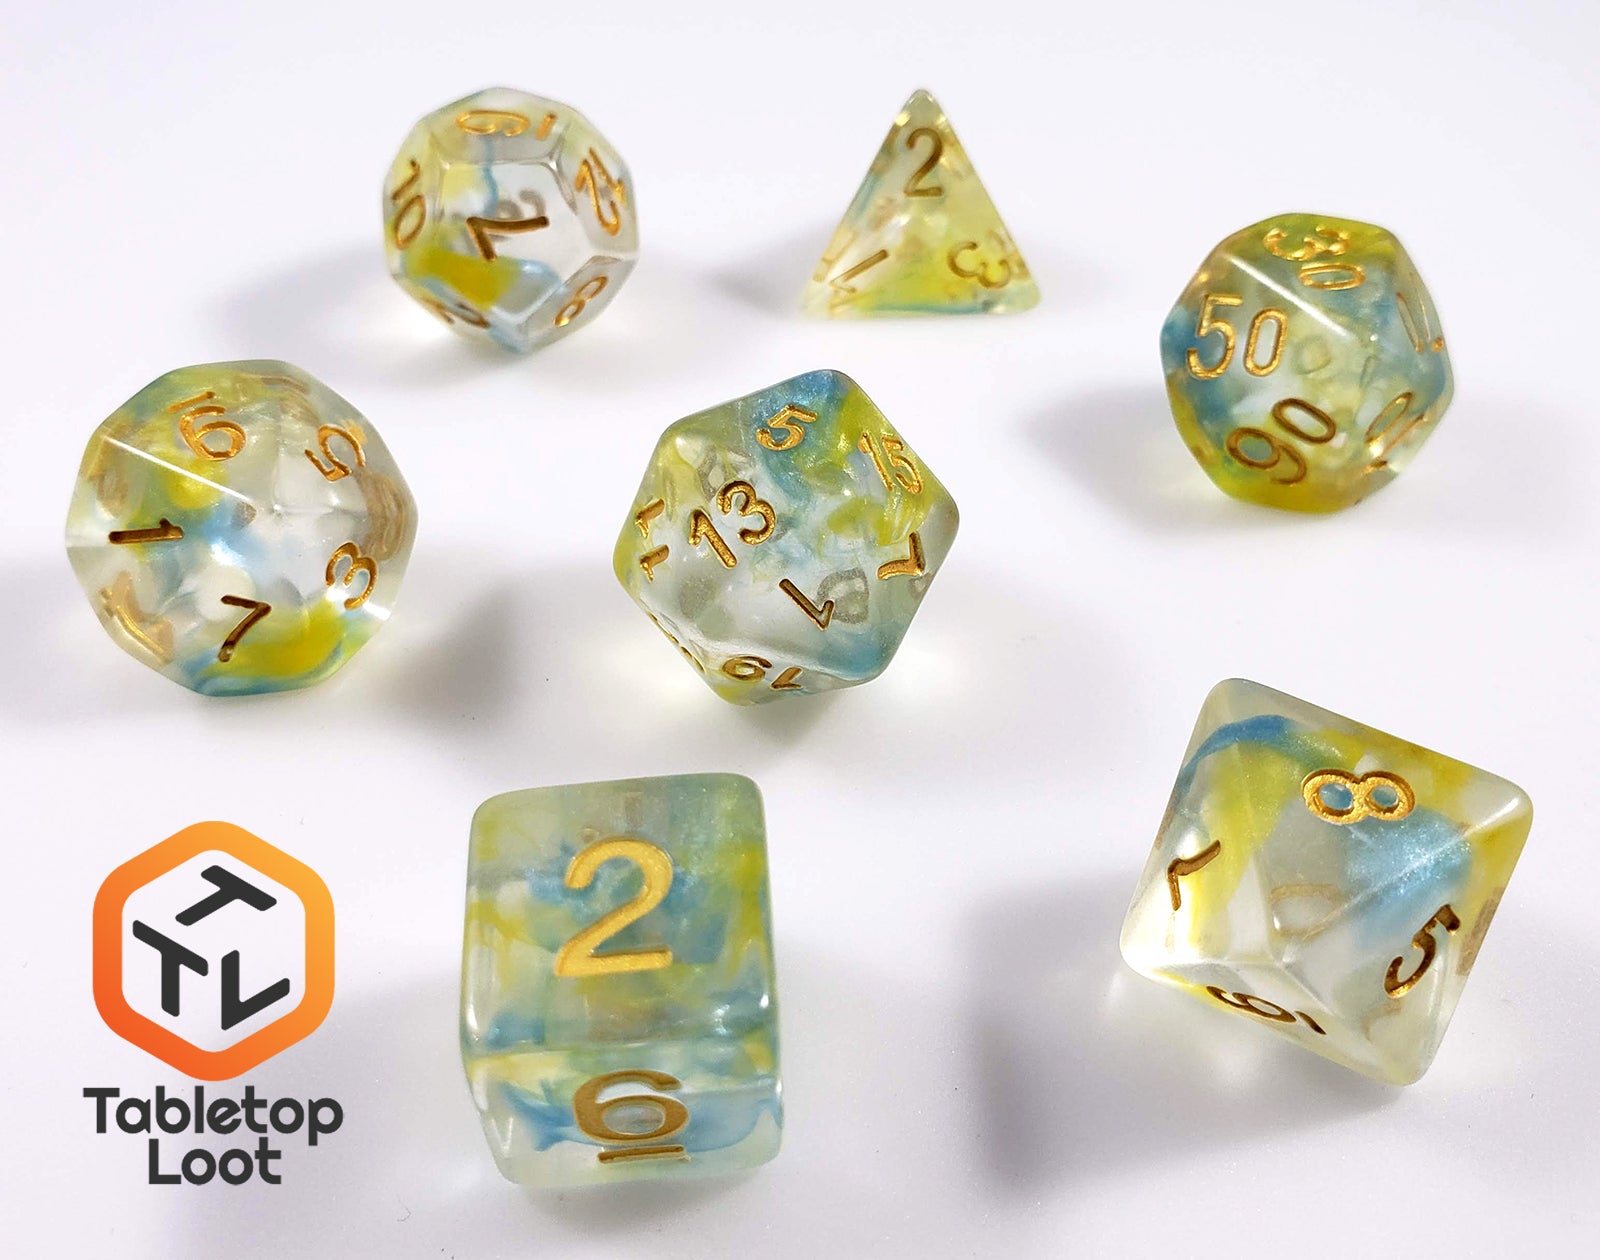 The Nature's Essence 7 piece dice set from Tabletop Loot with swirls of blue and green in clear resin with gold numbering.